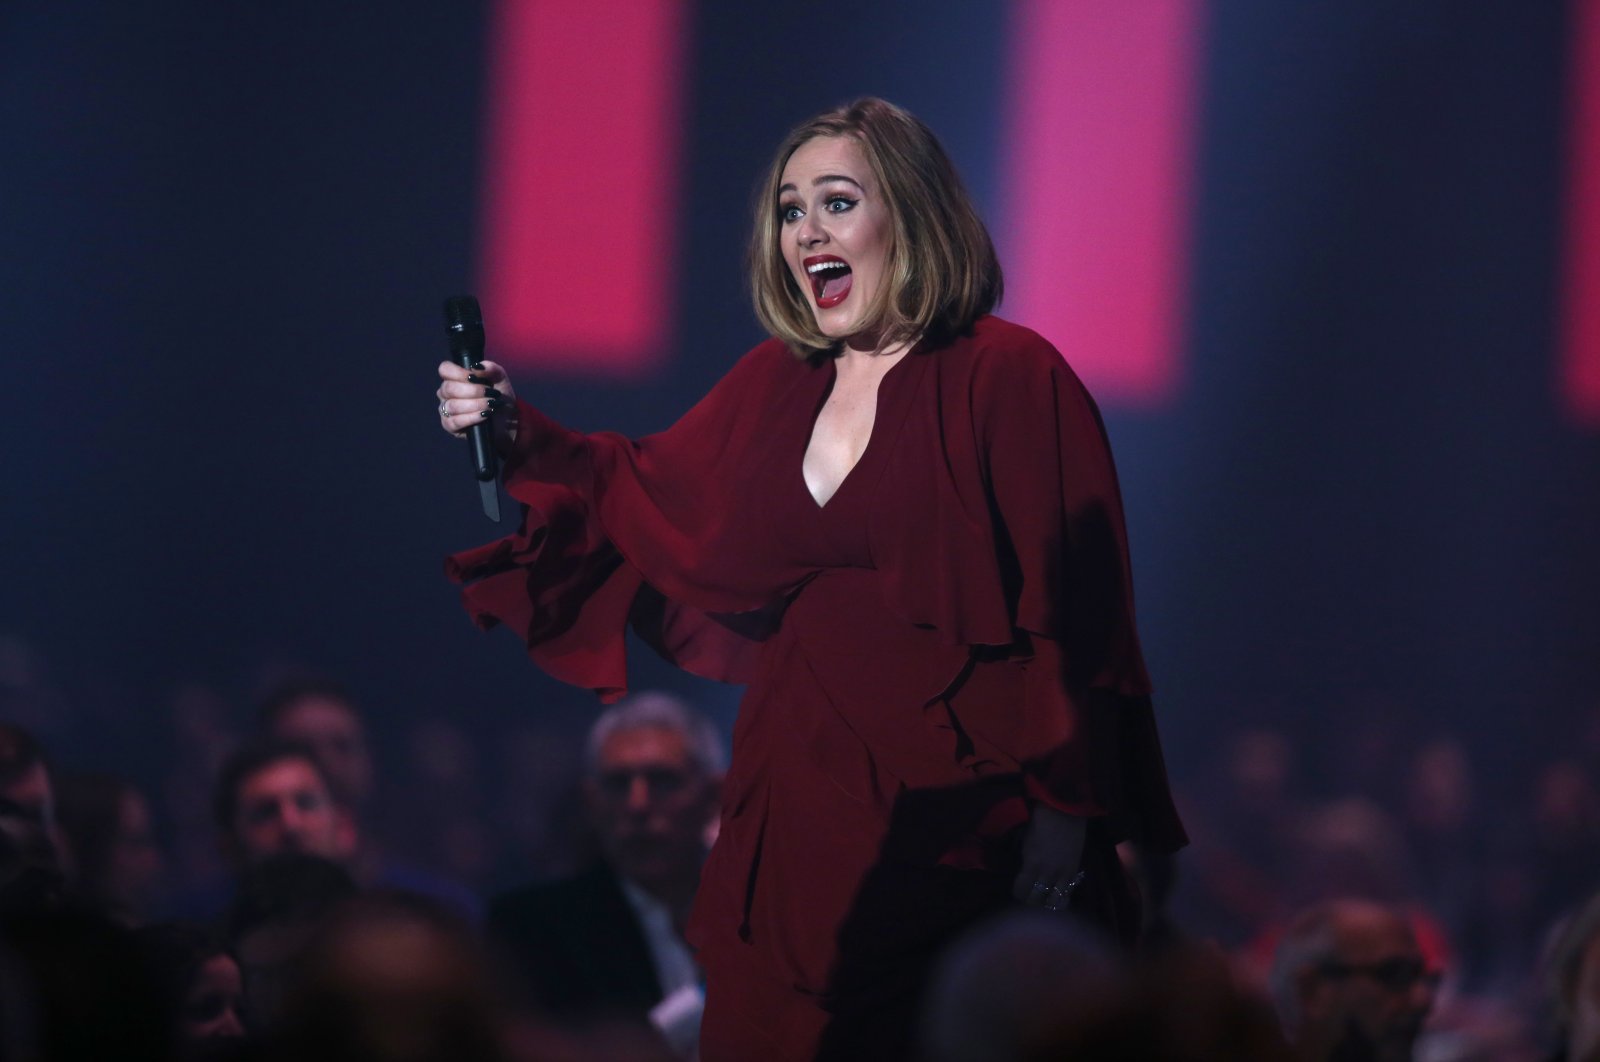 Singer Adele makes her way to the stage to receive the Best British Single award at the Brit Awards 2016 at the 02 Arena in London, England, Feb. 24, 2016. (AP)